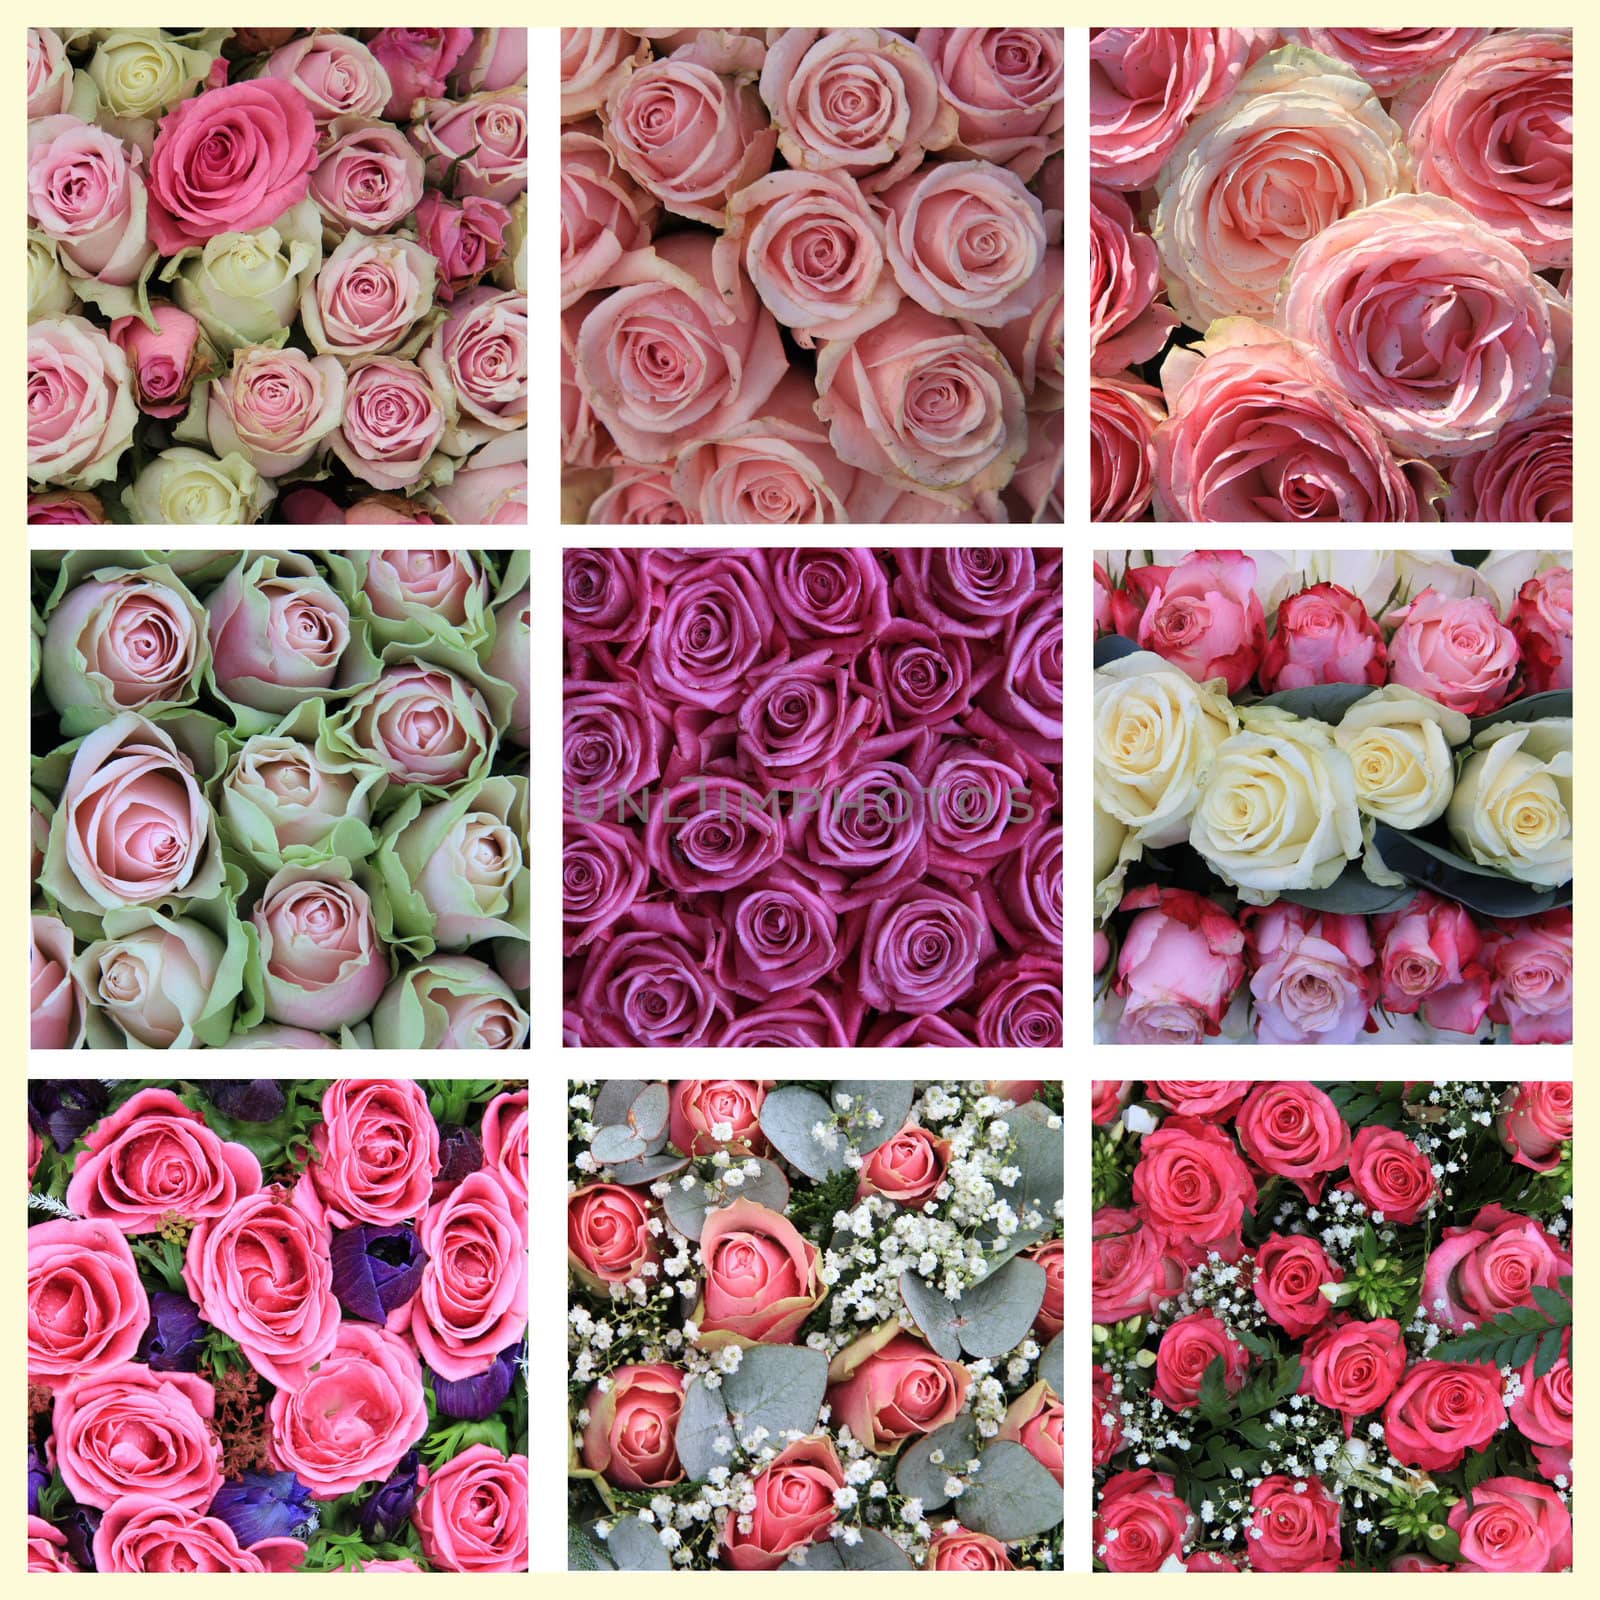 pink rose collage by studioportosabbia